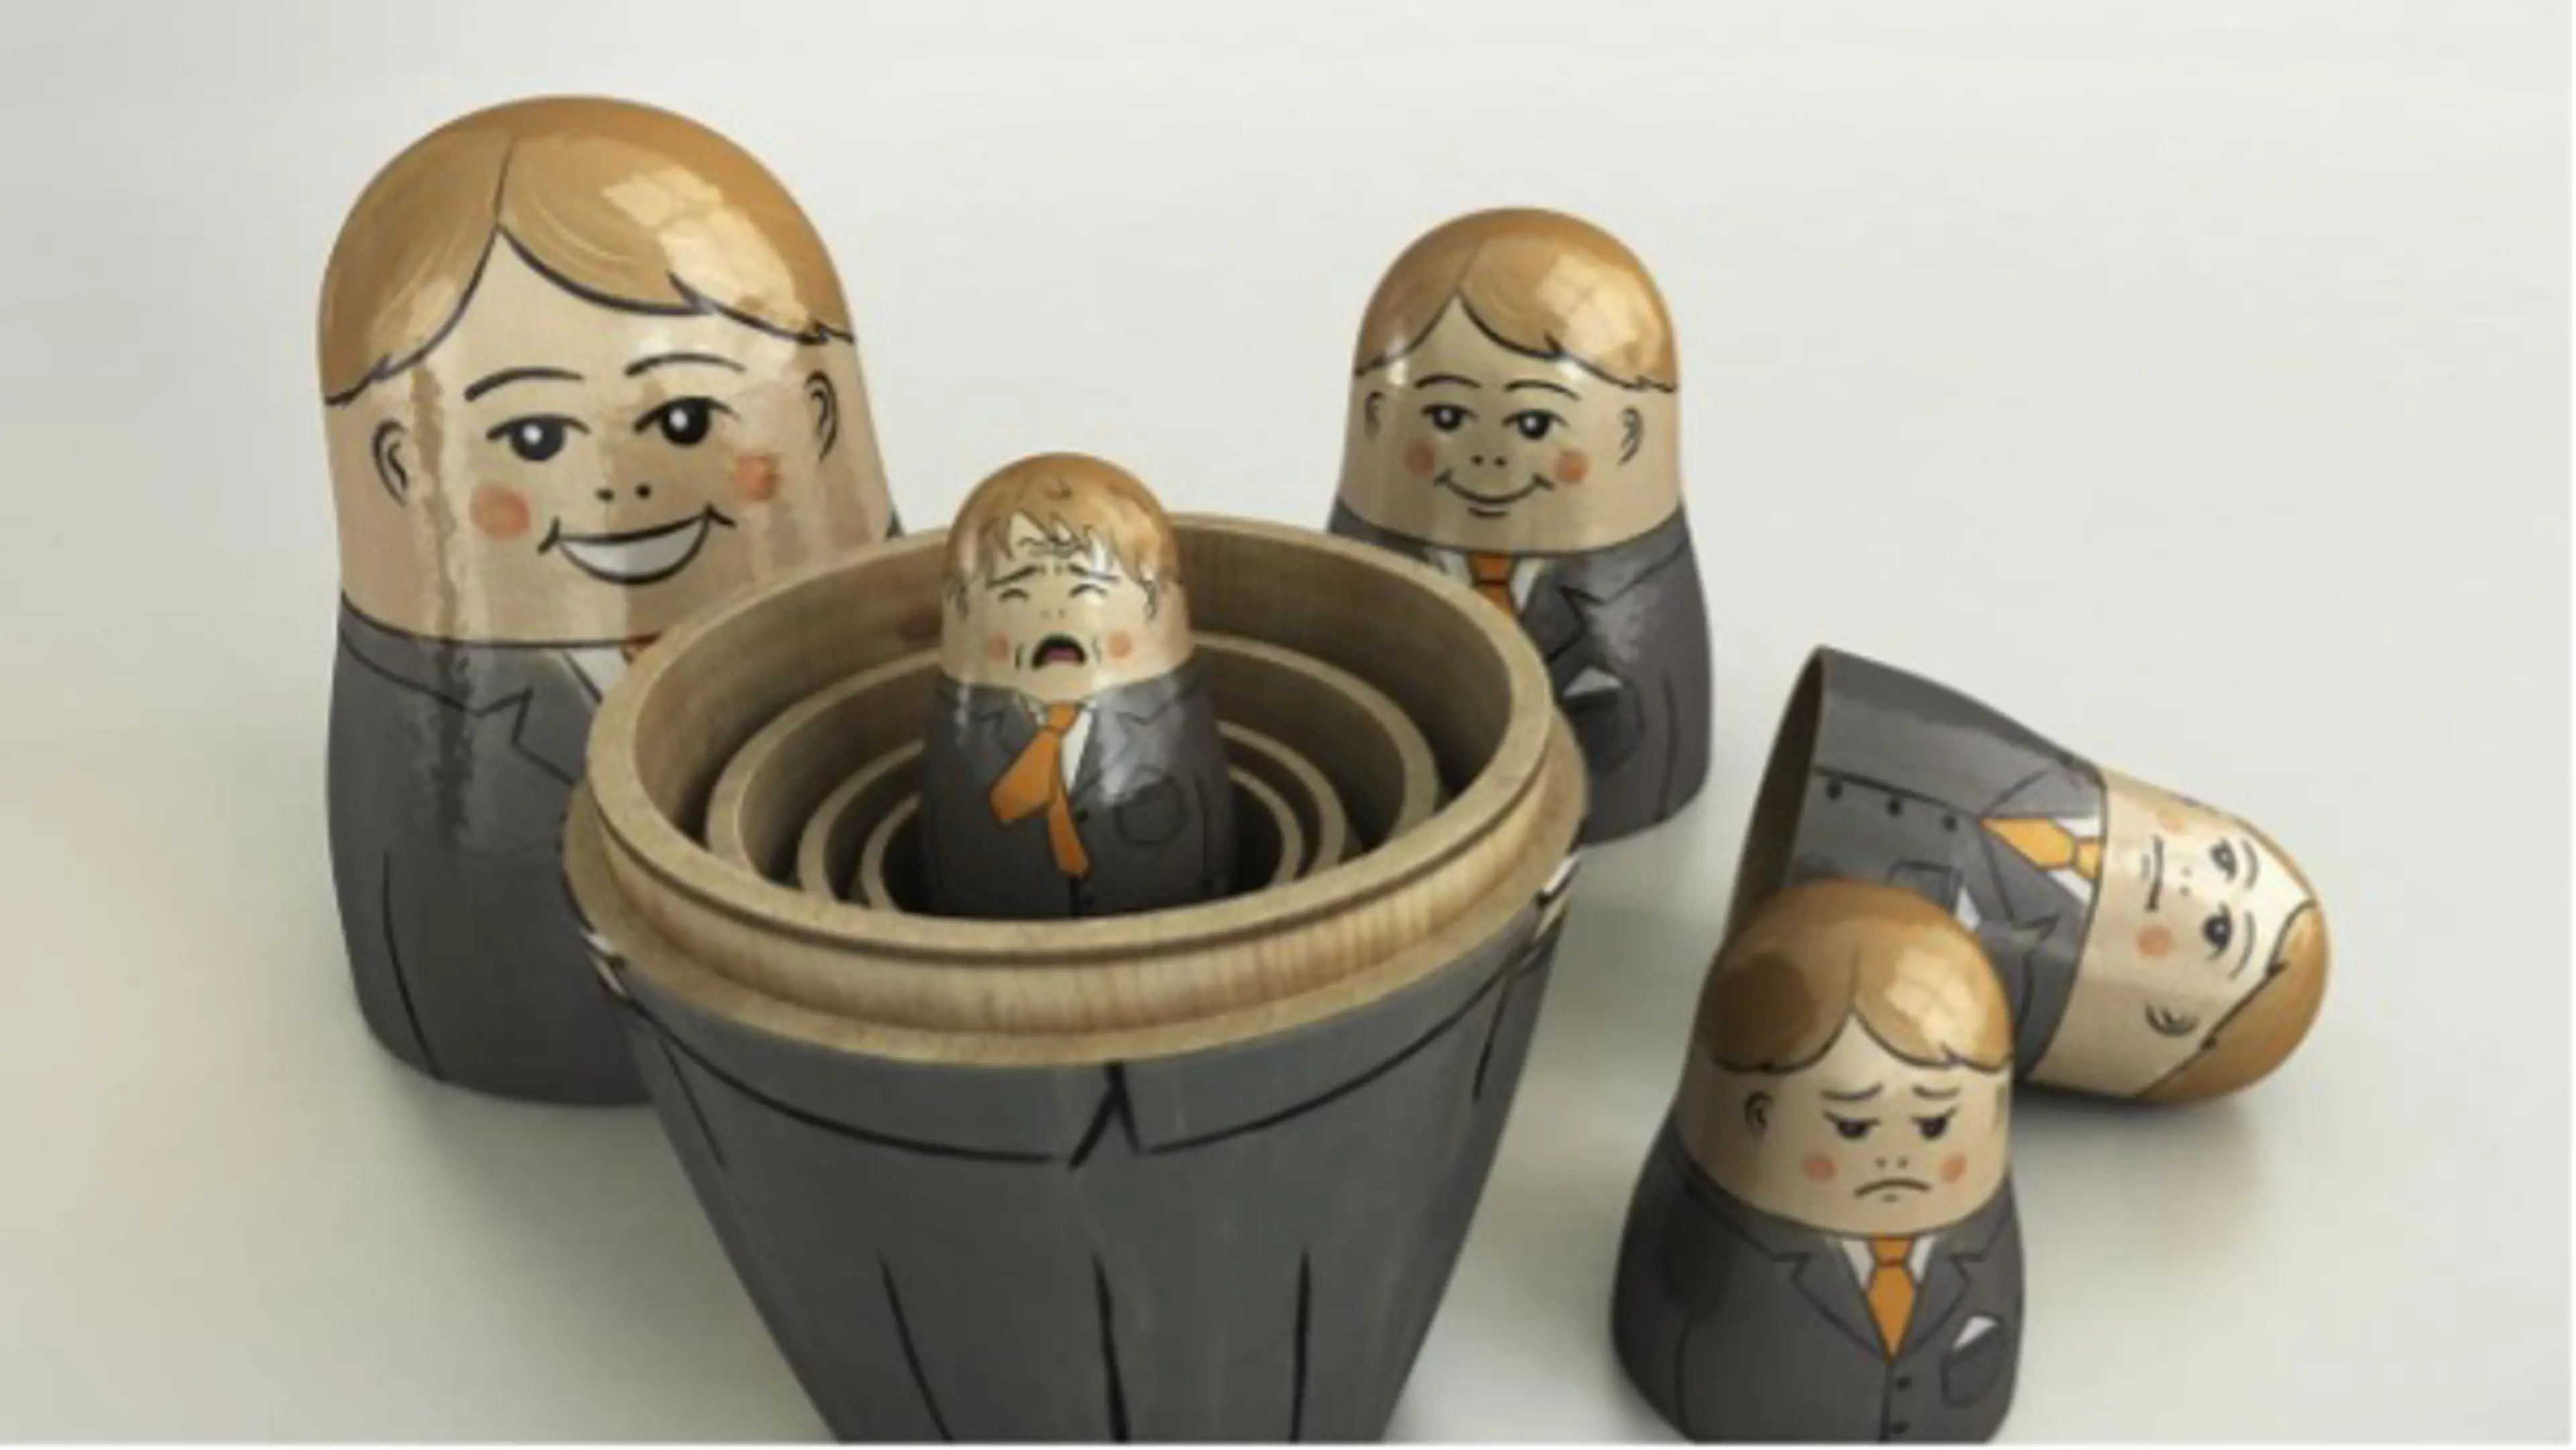 Manager as Russian dolls destacked, with faces changing from the biggest one smiling to the smallest one crying